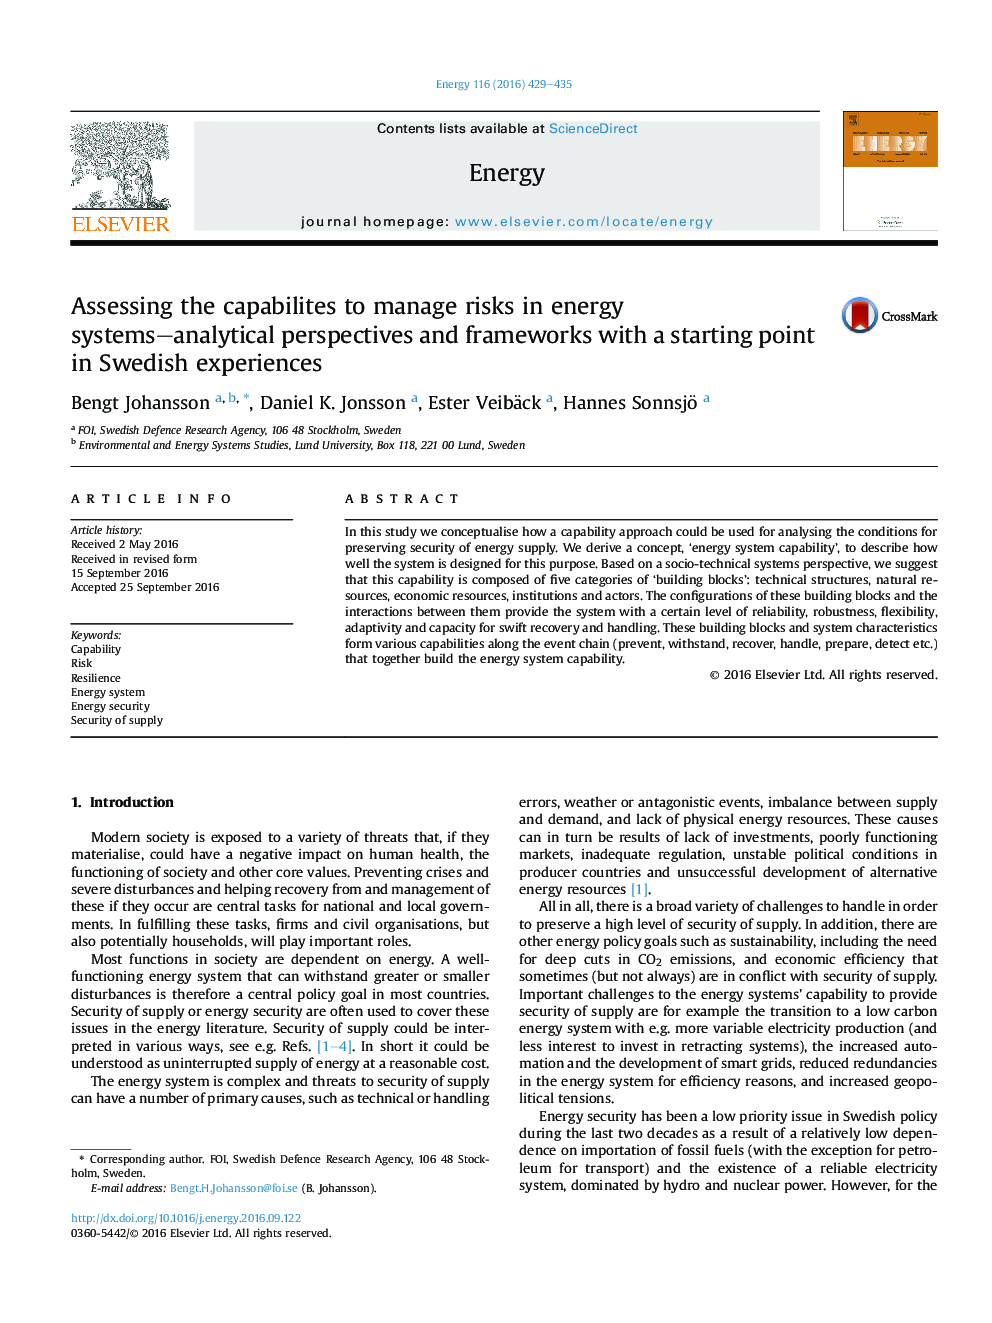 Assessing the capabilites to manage risks in energy systems-analytical perspectives and frameworks with a starting point in Swedish experiences